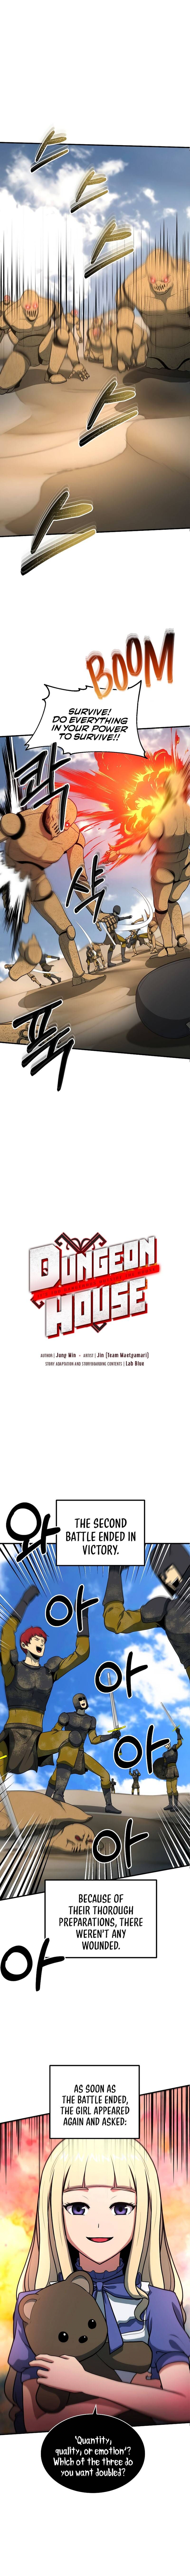 dungeon_house_49_1